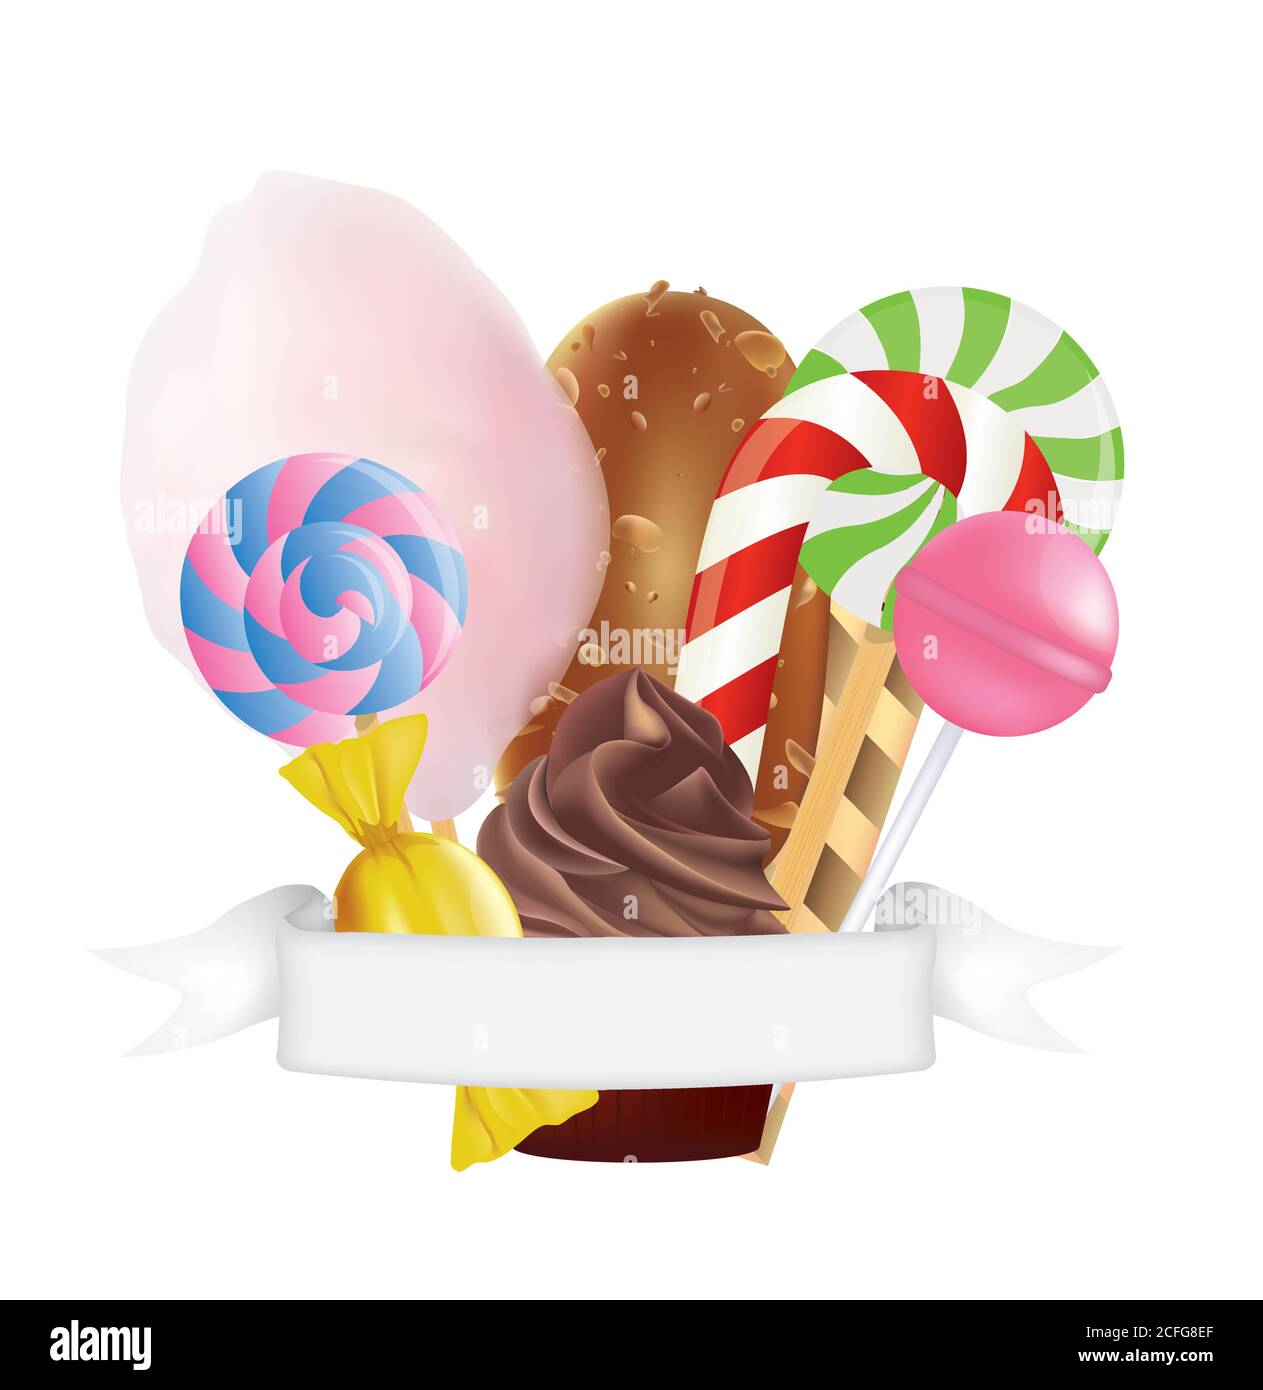 Various sweets set. vector illustration Stock Vector